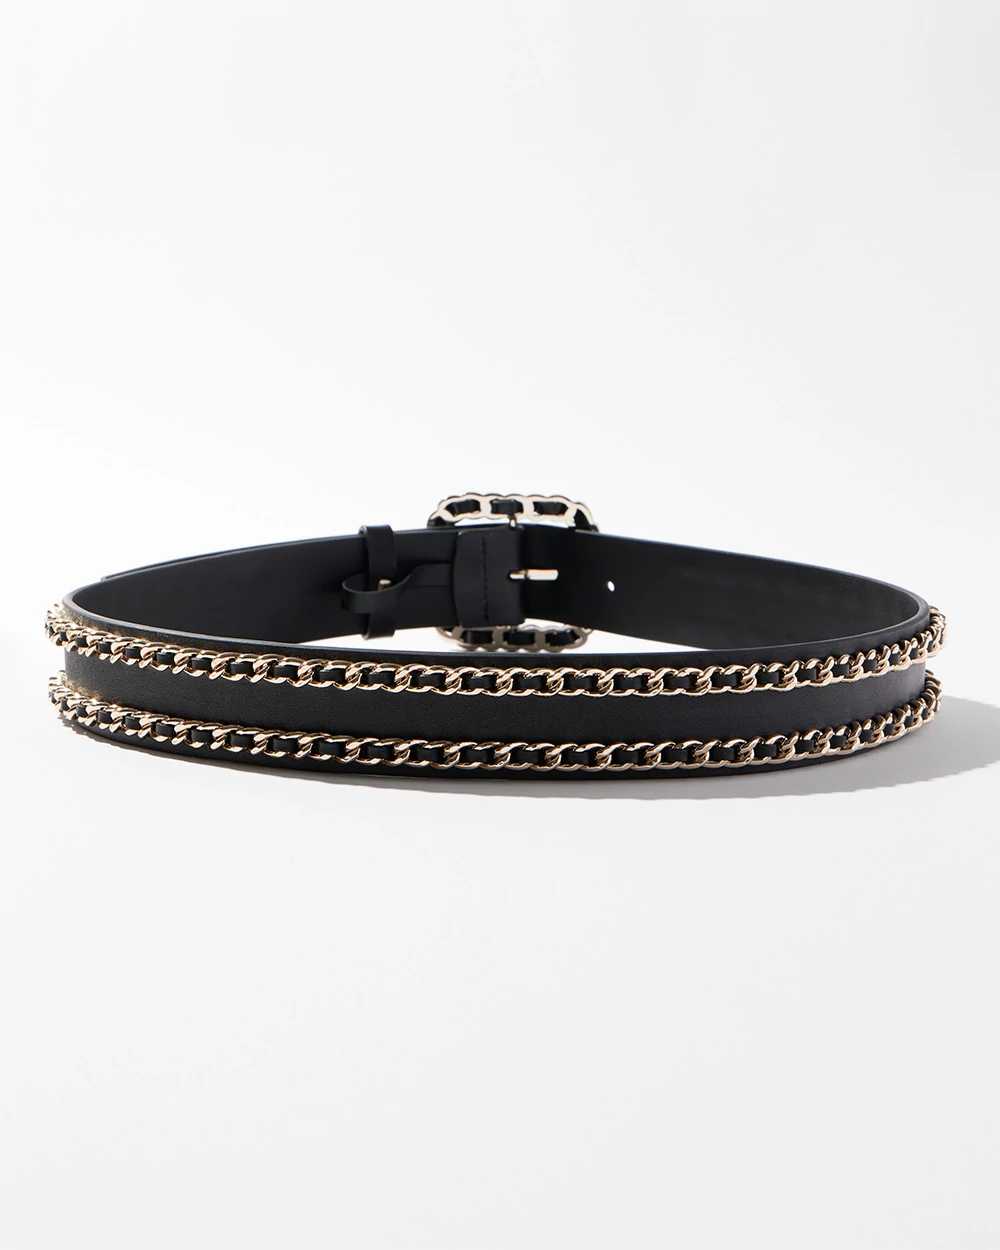 Double Chain Leather Belt click to view larger image.